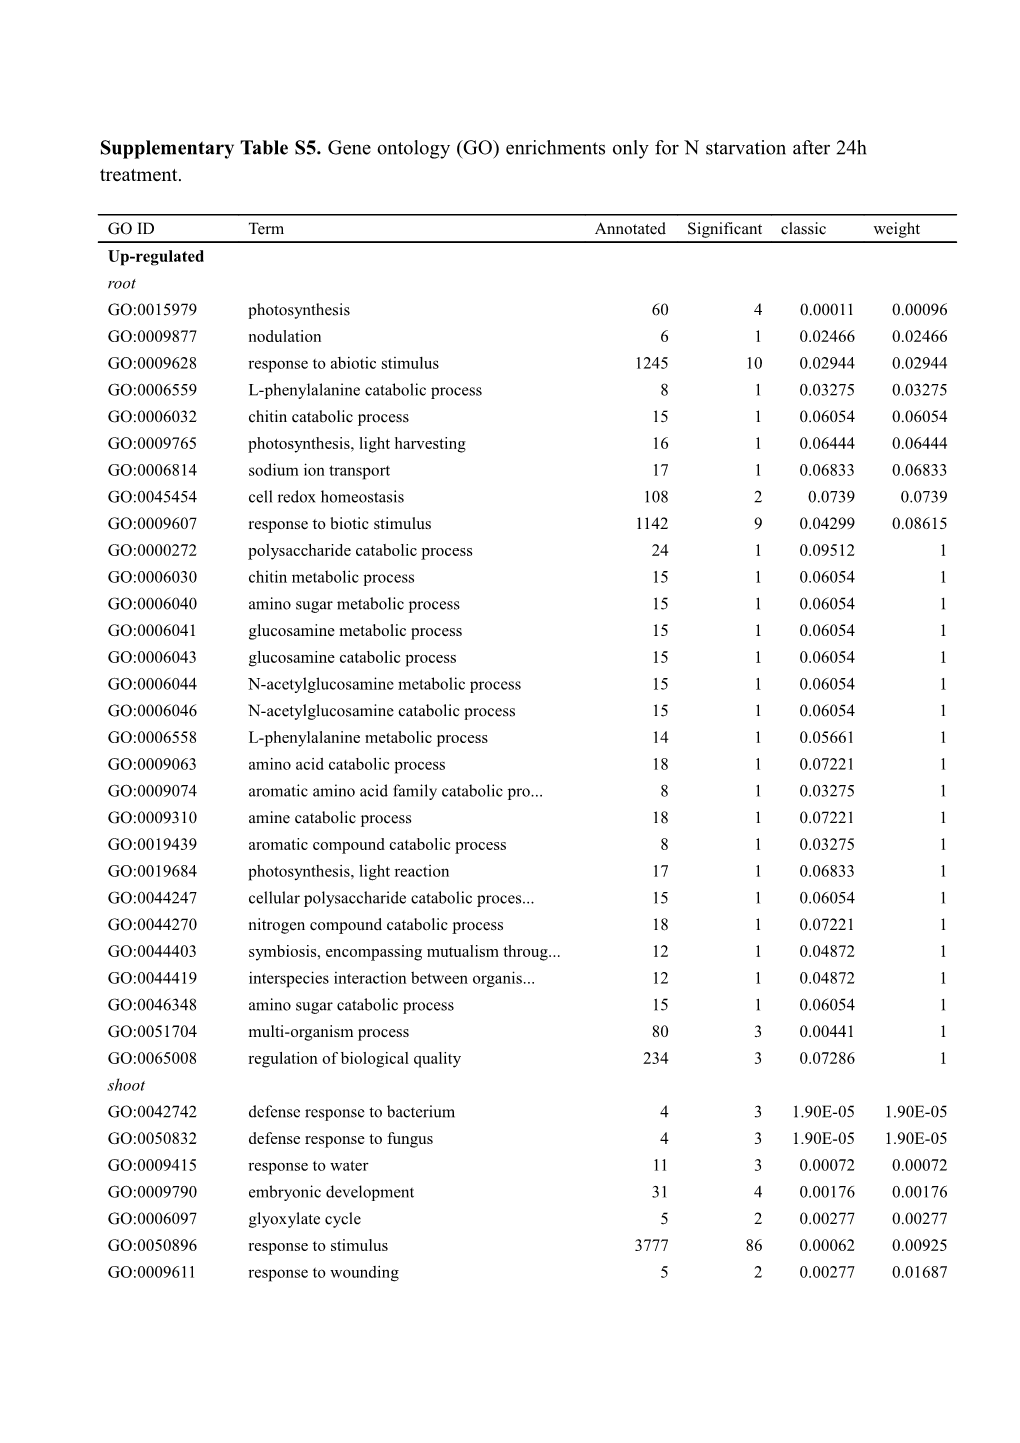 Supplementary Table S5. Gene Ontology(GO) Enrichments Only for N Starvation After 24H